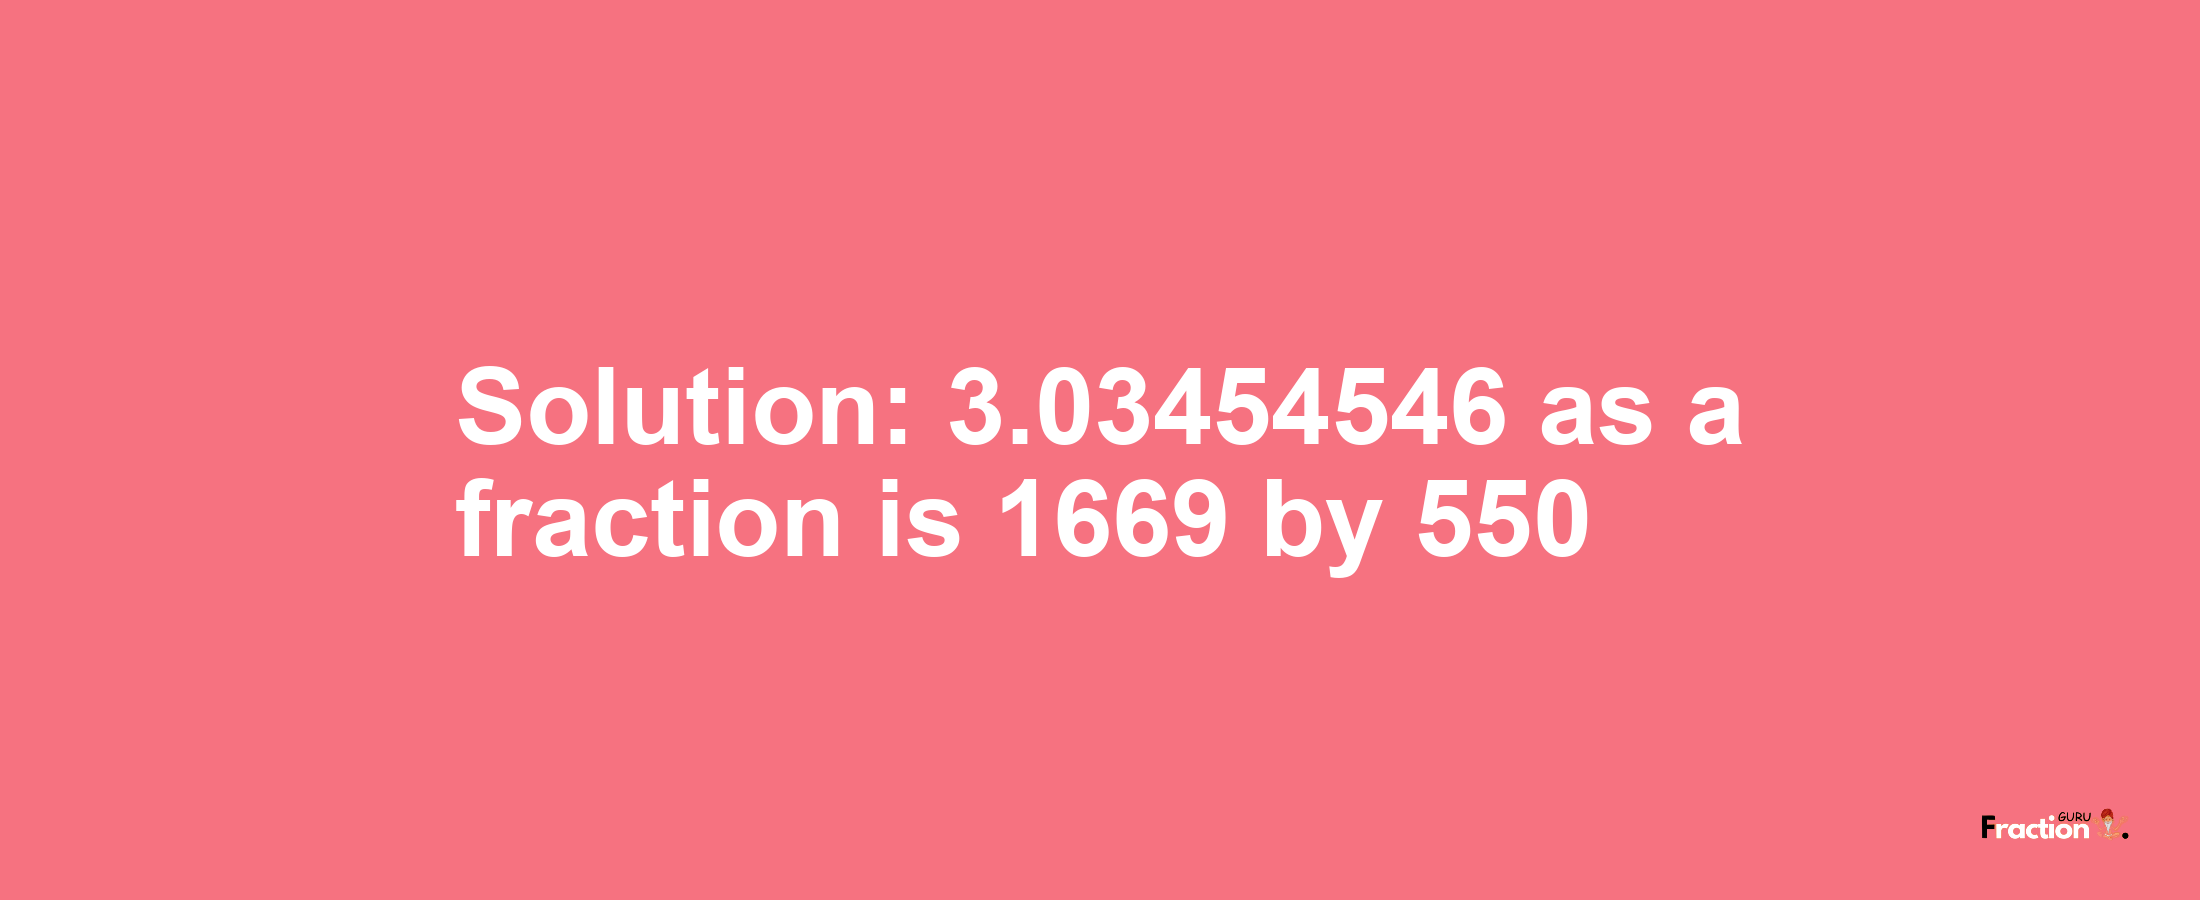 Solution:3.03454546 as a fraction is 1669/550